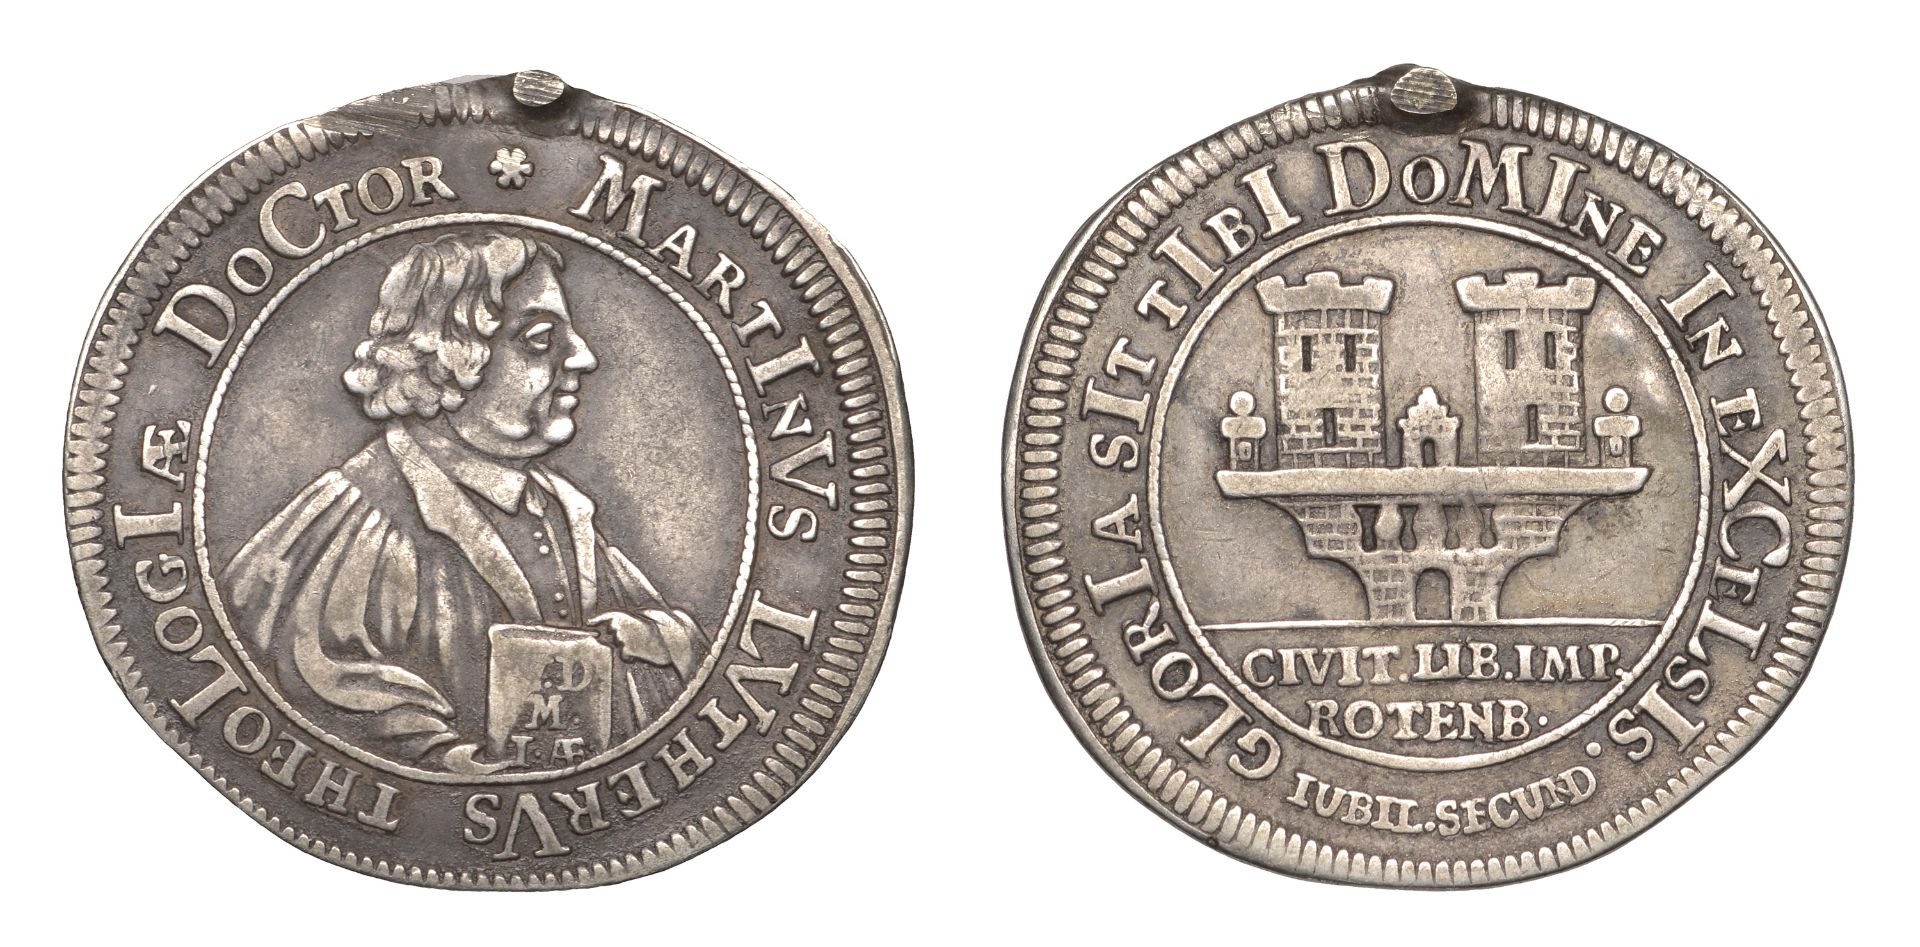 Germany, ROTHENBURG, Free City, Two Ducats, 1717, struck in silver, date in chronogram on bo...